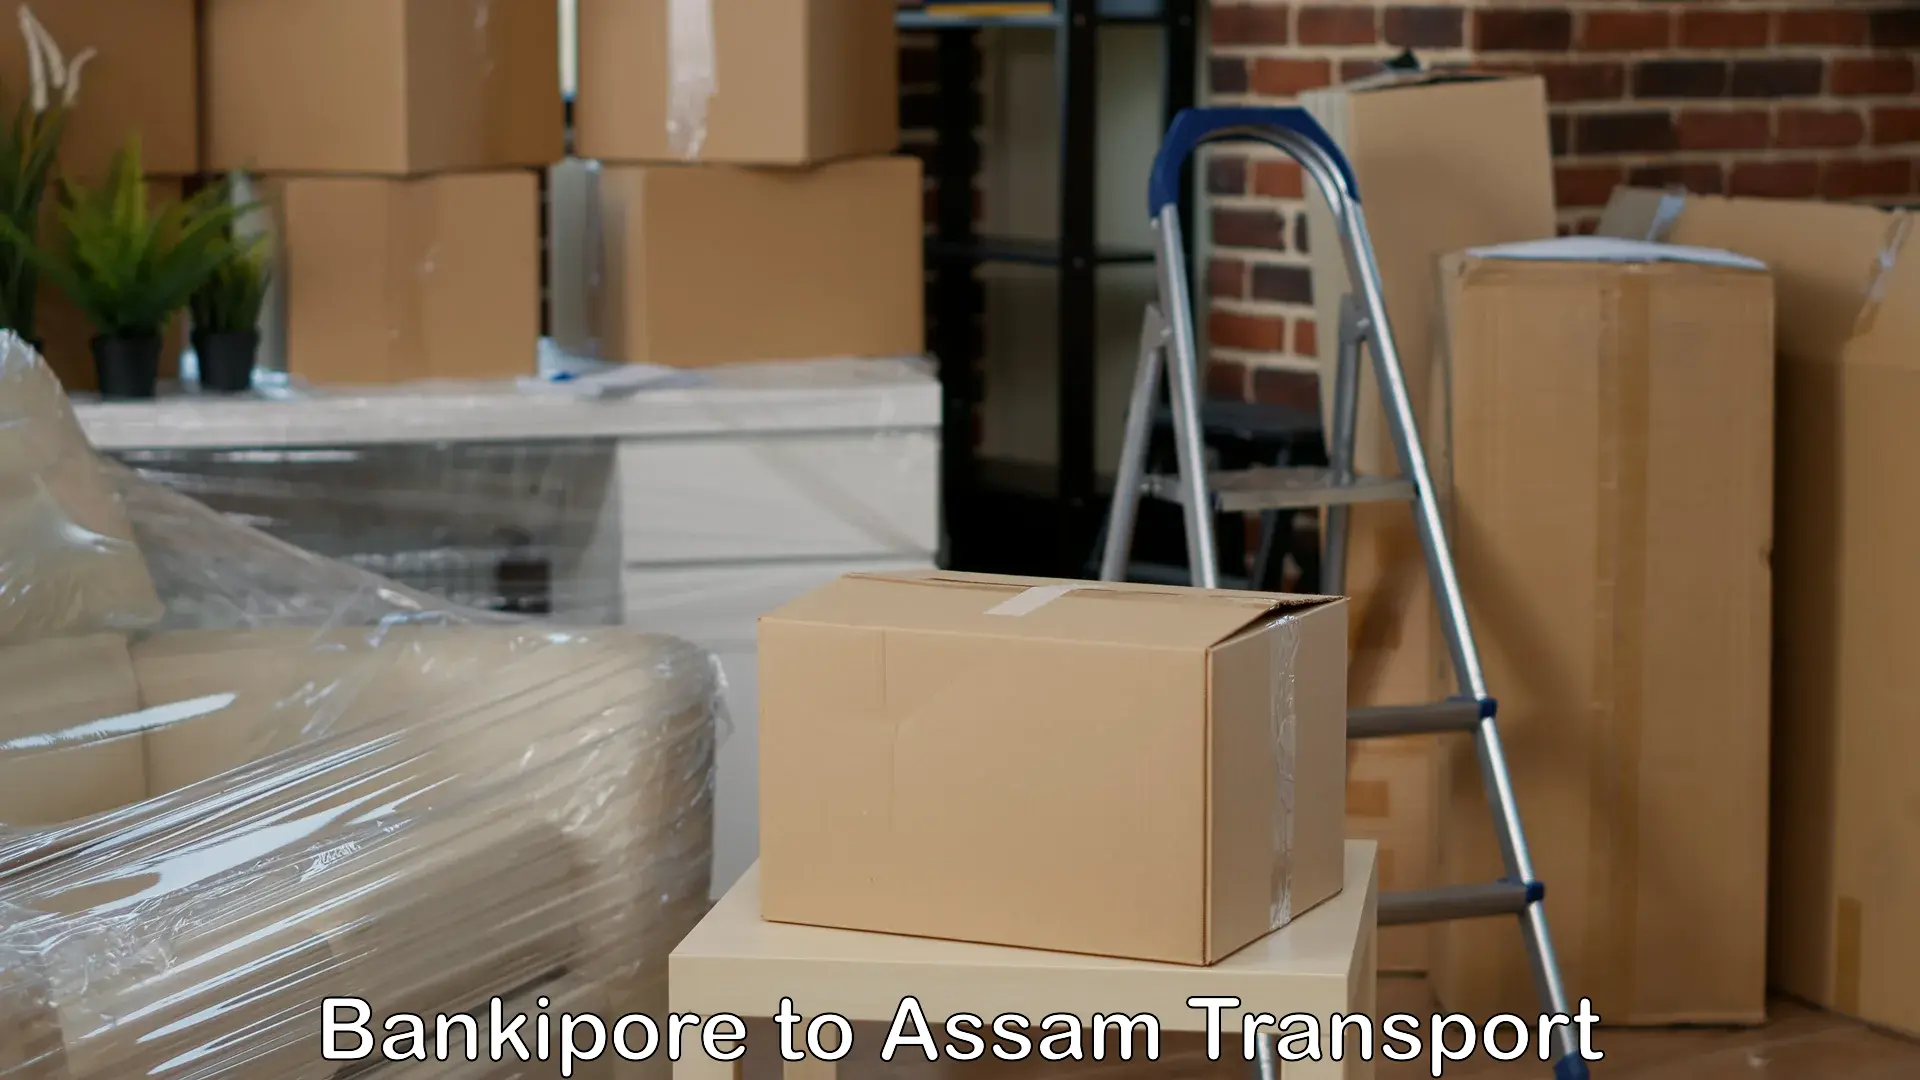 Daily parcel service transport Bankipore to Gossaigaon